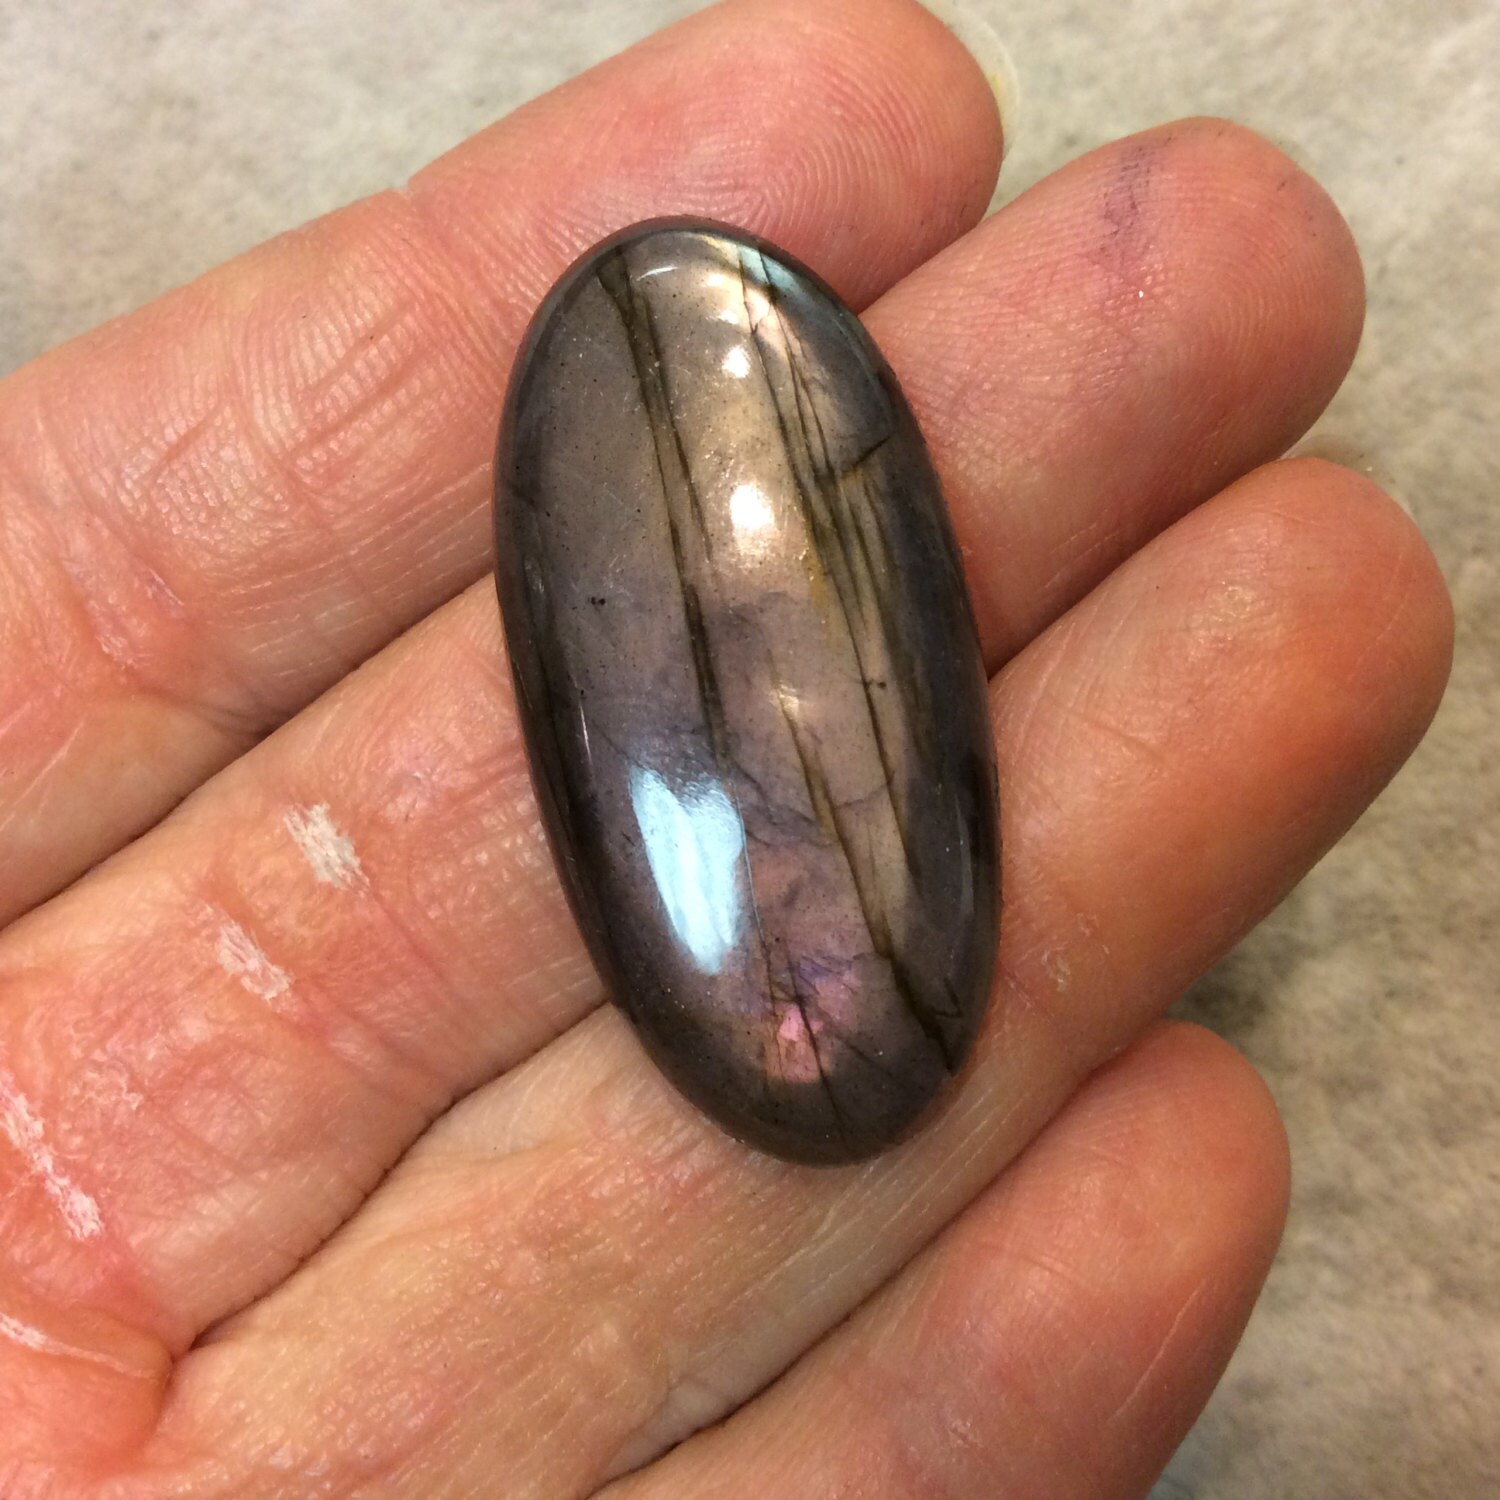 Purple Labradorite Oblong Oval Shaped Flat Back Cabochon - Measuring 19mm X 39mm, 7mm Dome Height - Natural High Quality Gemstone